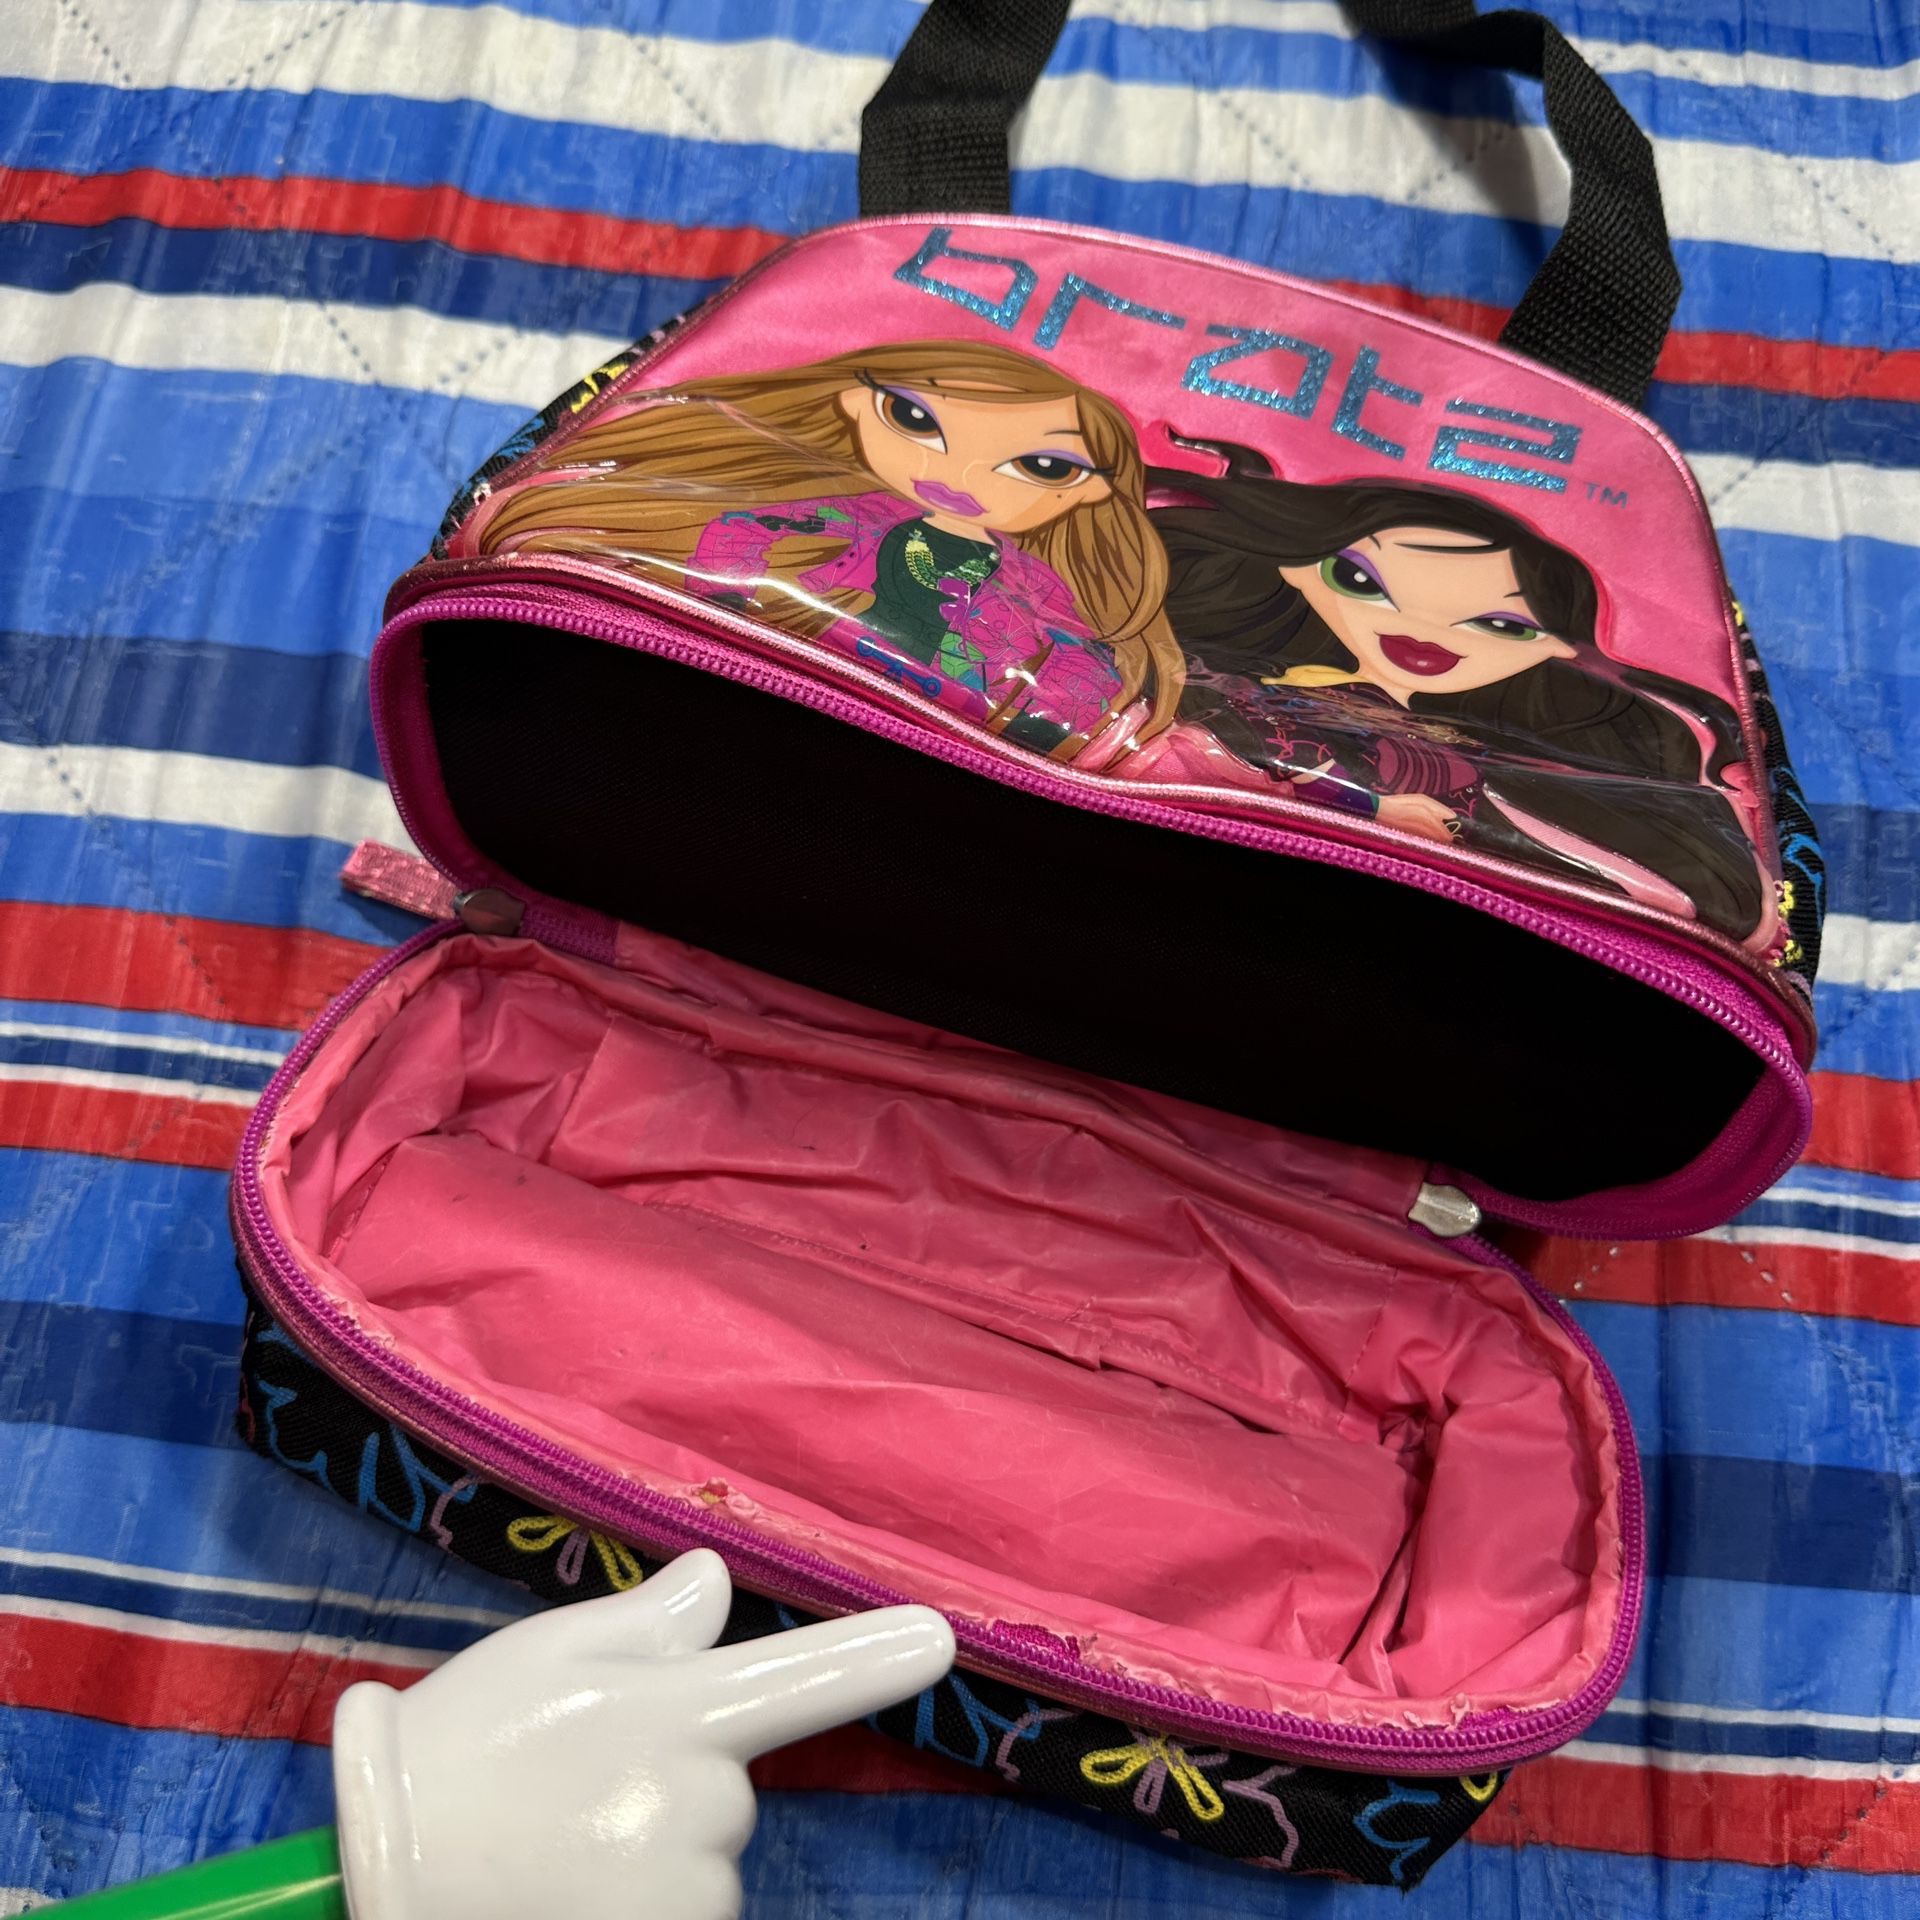 Disney - Princess Lunch Bag for Sale in New York, NY - OfferUp